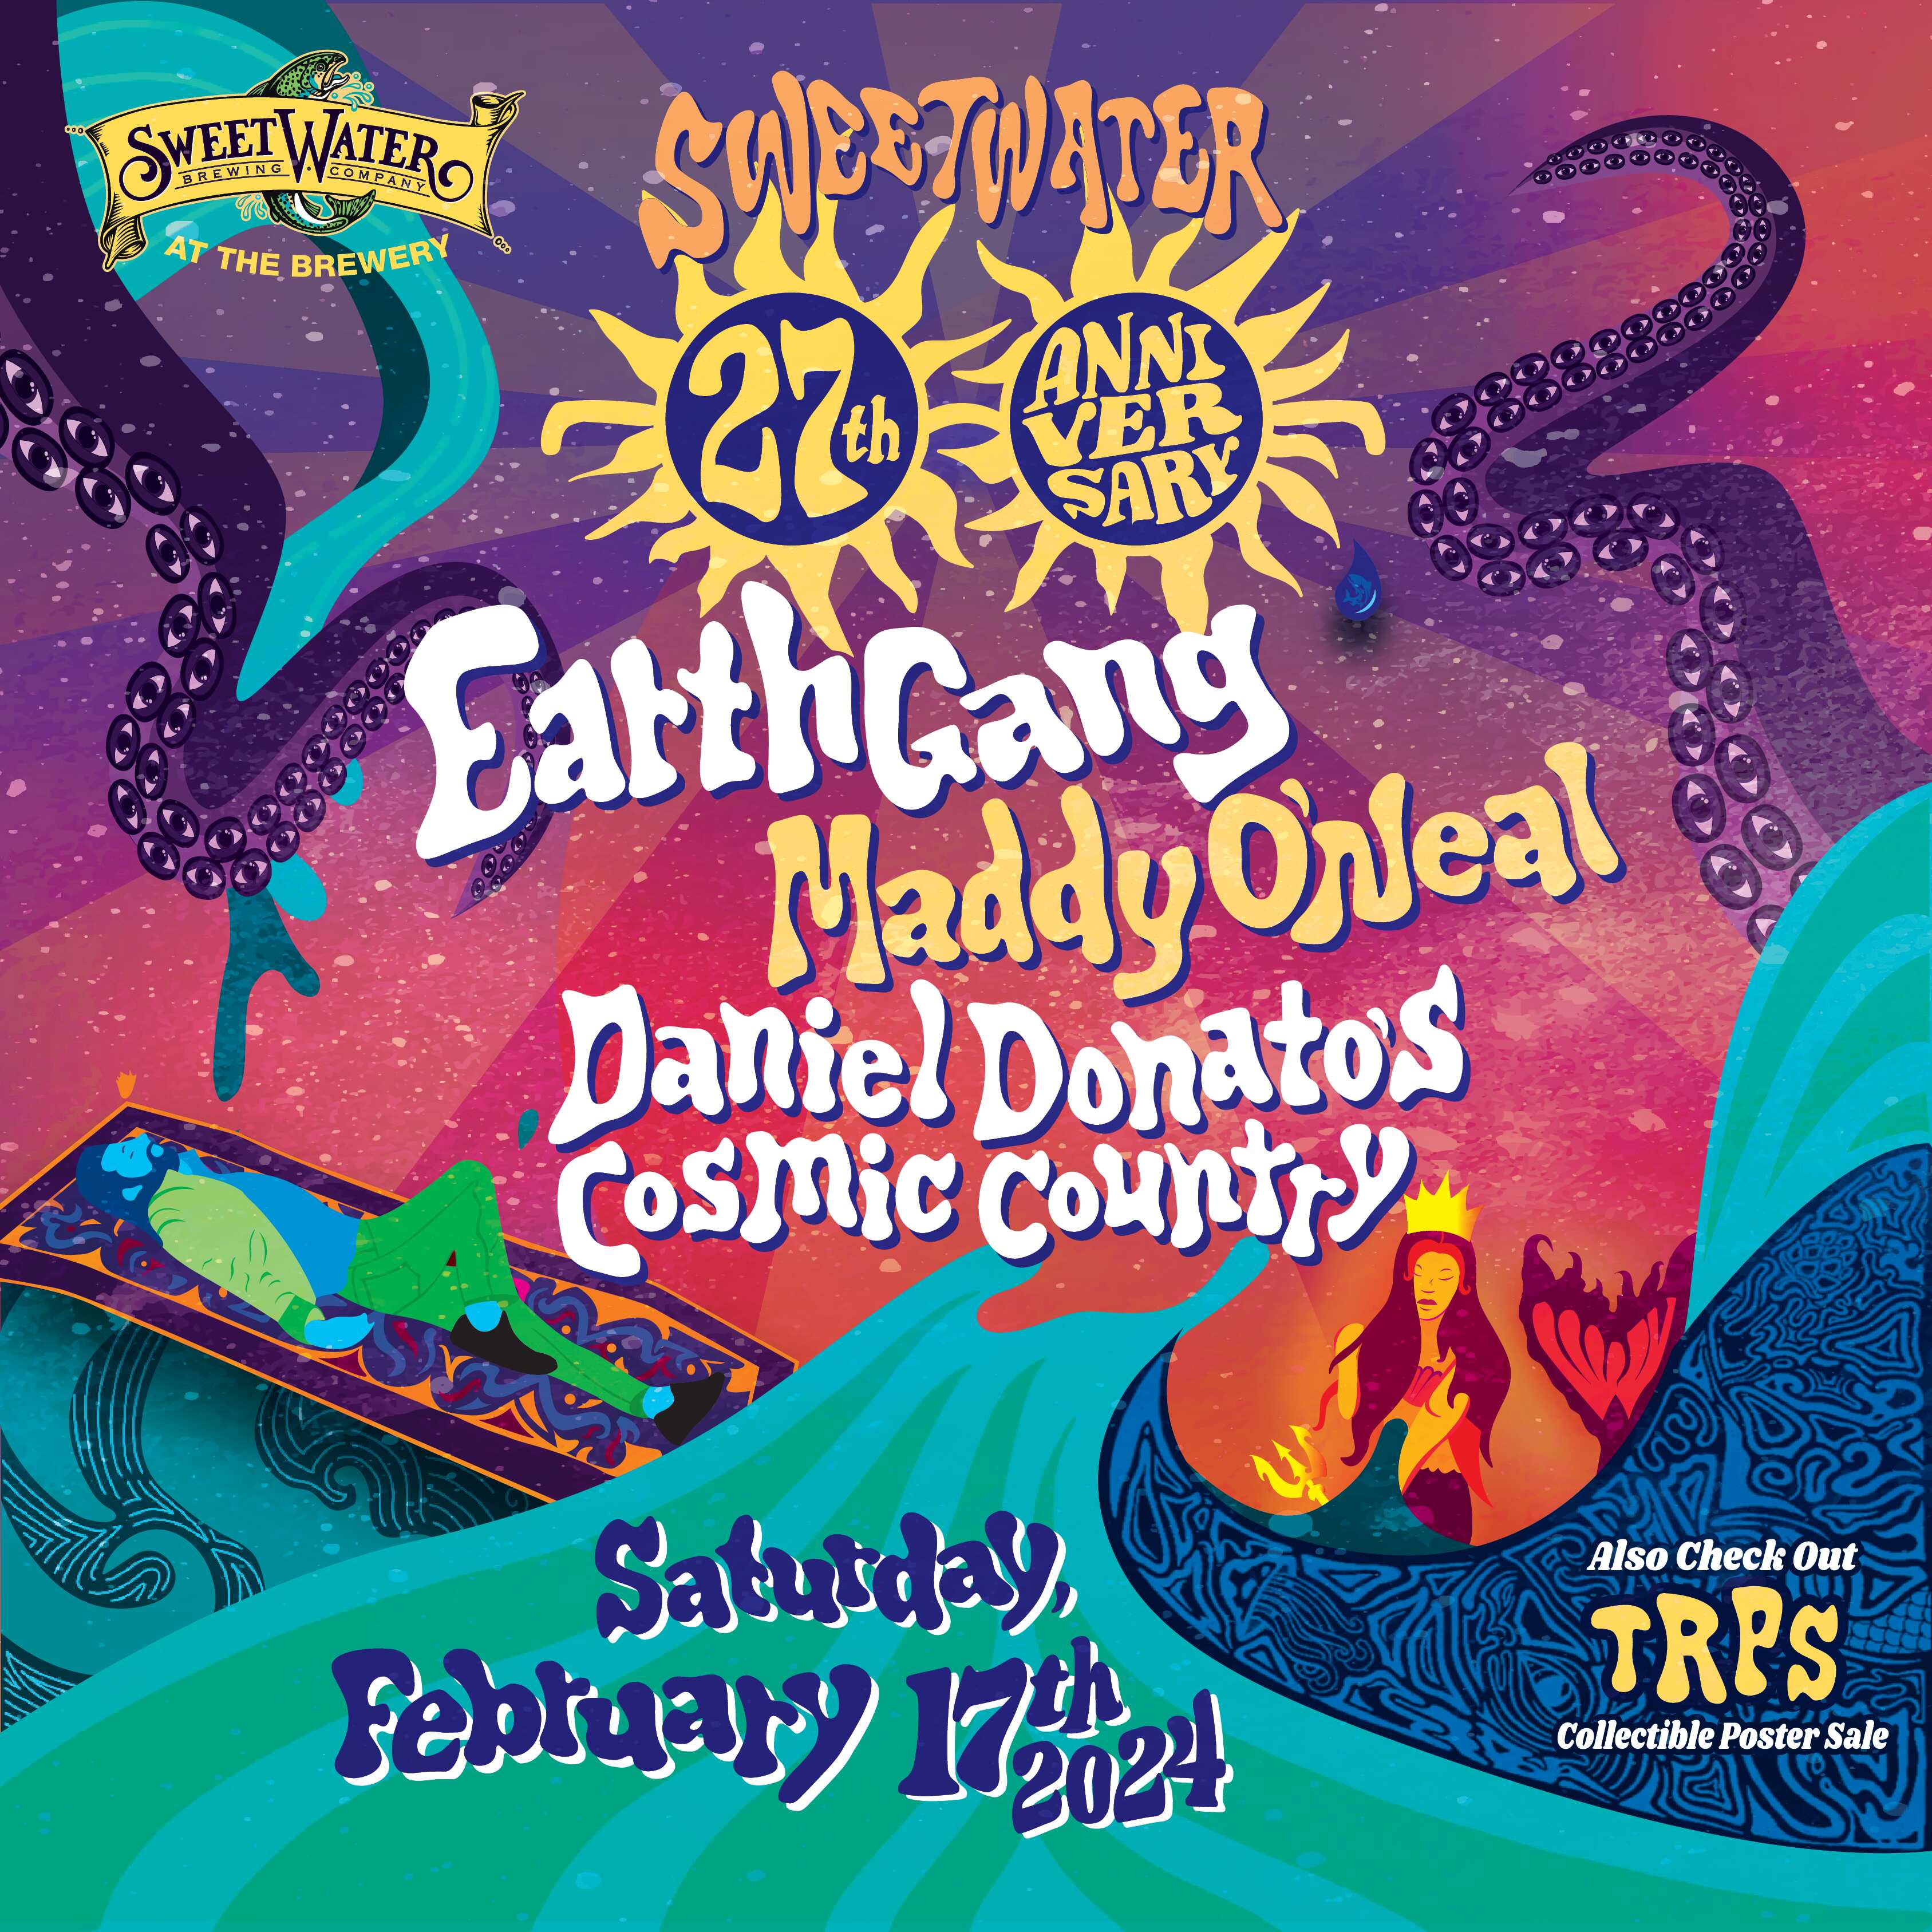 SweetWater Brewing Company's Official 27th Anniversary Party Poster